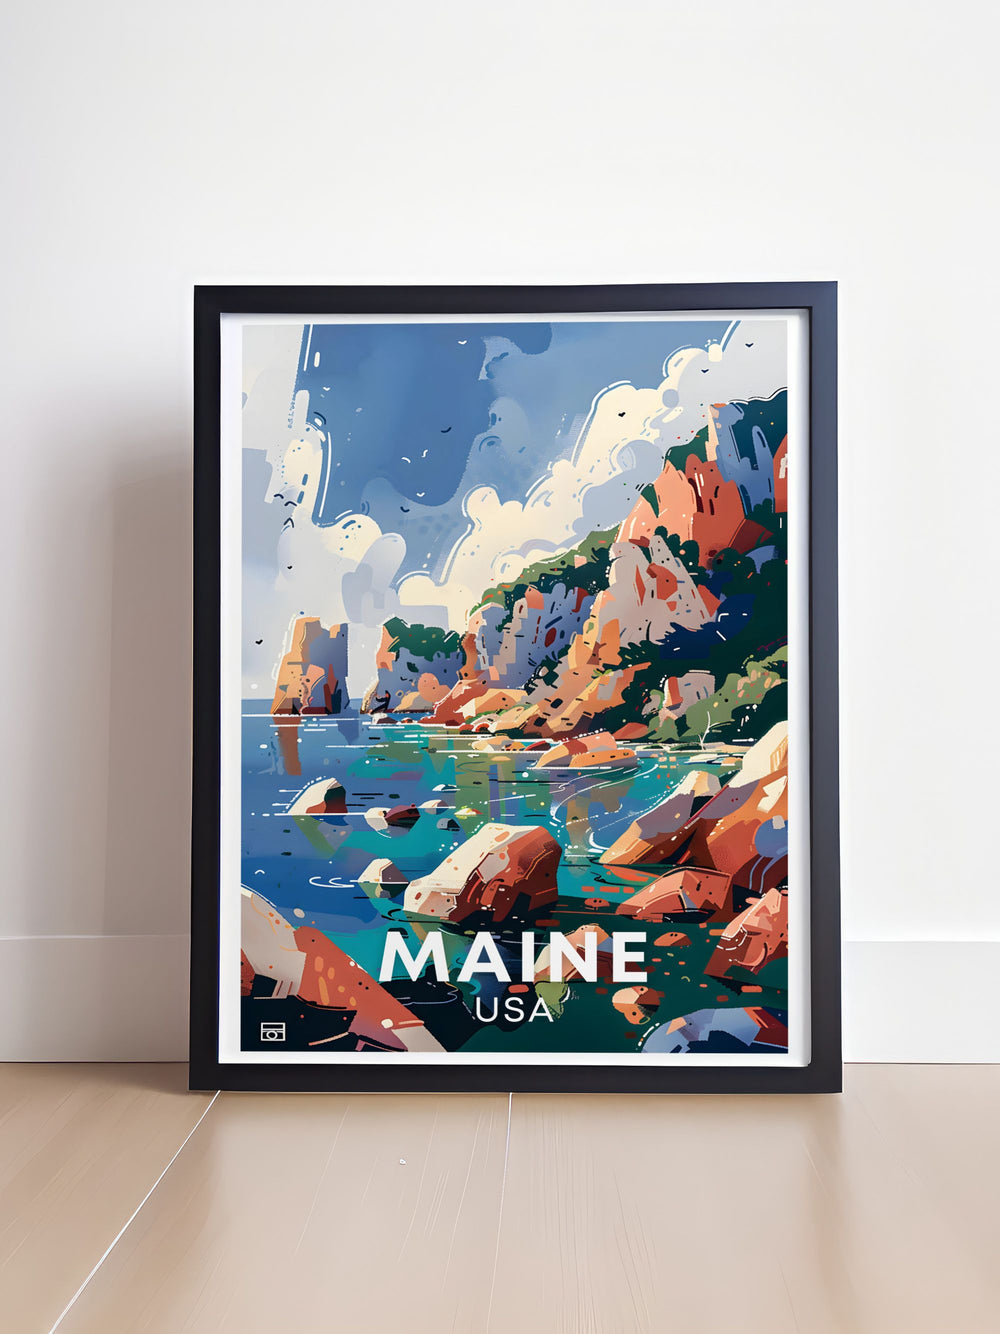 Acadia National Park, located on Mount Desert Island, is highlighted in this poster. Its iconic features such as Cadillac Mountain and Thunder Hole are beautifully captured, making it a perfect piece for those who enjoy scenic landscapes.